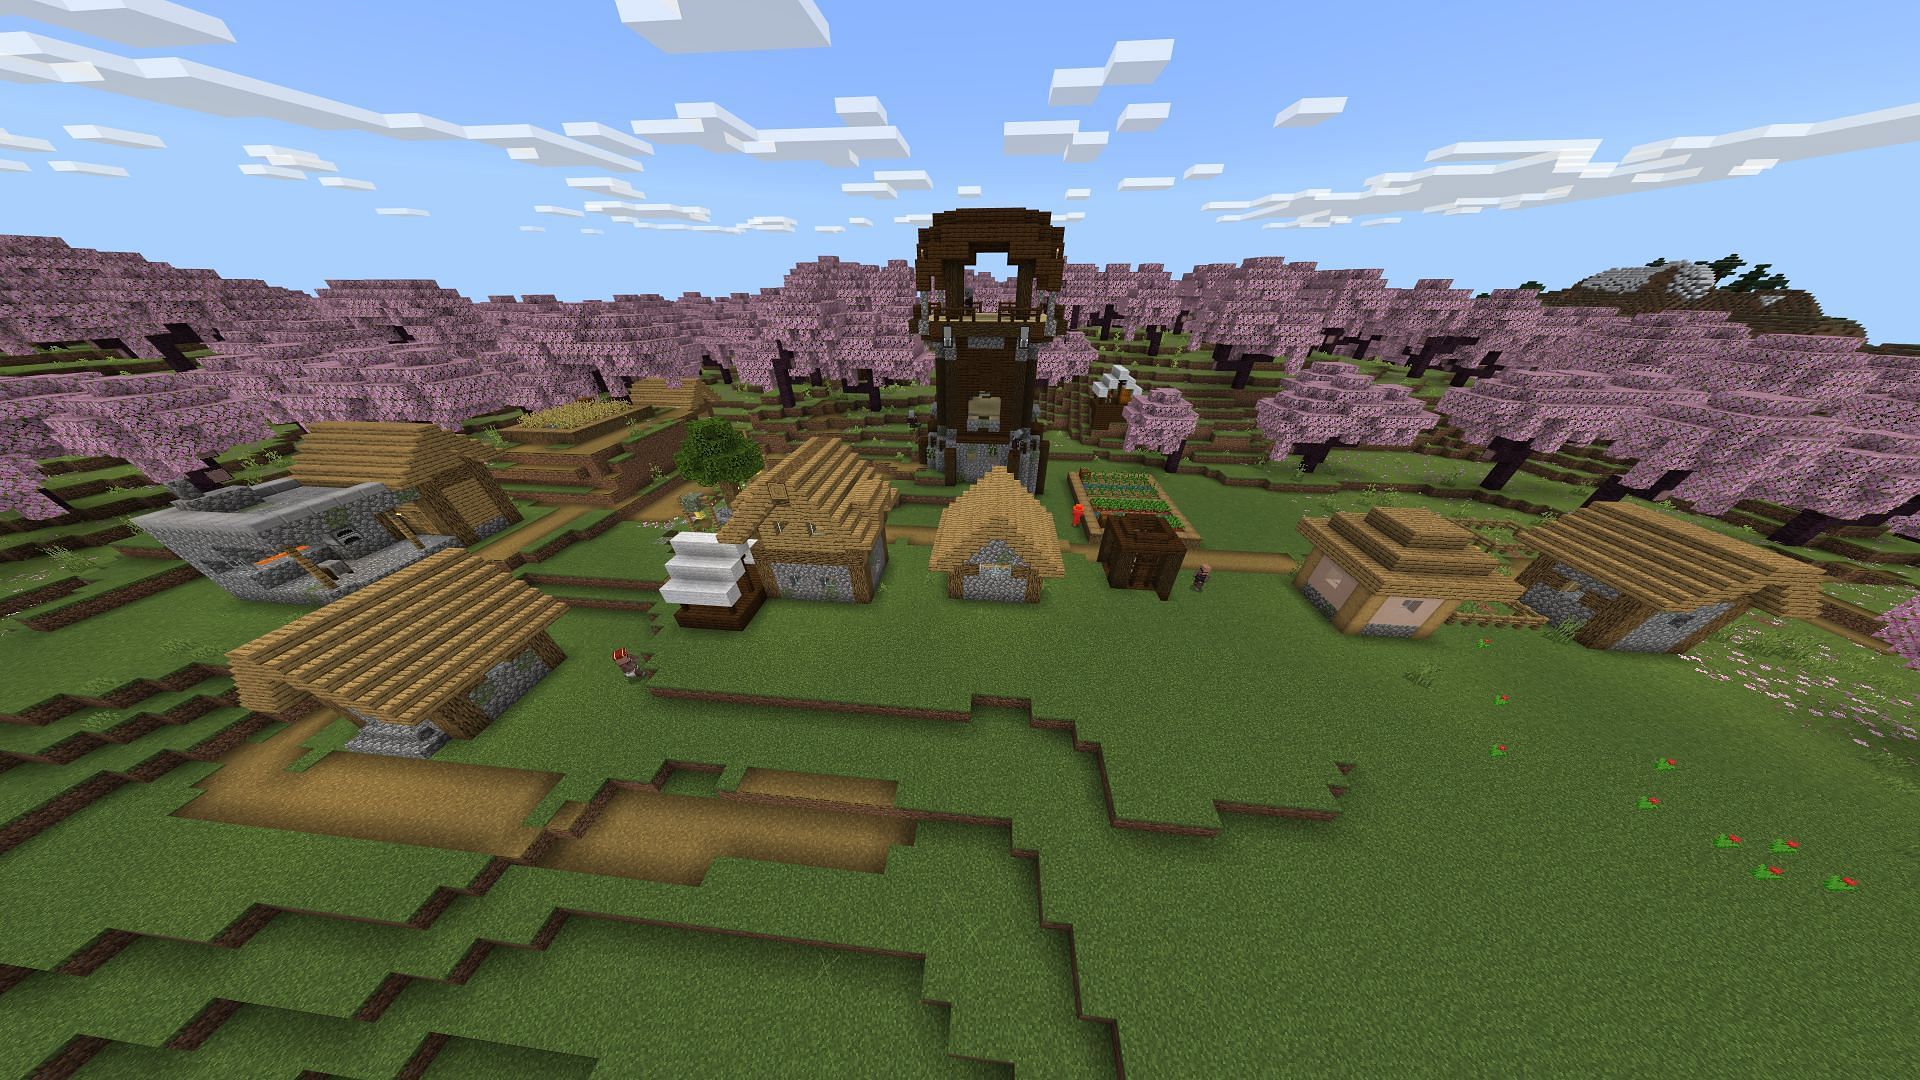 Chaos unfolds in a cherry grove biome in this seed (Image via Mojang)